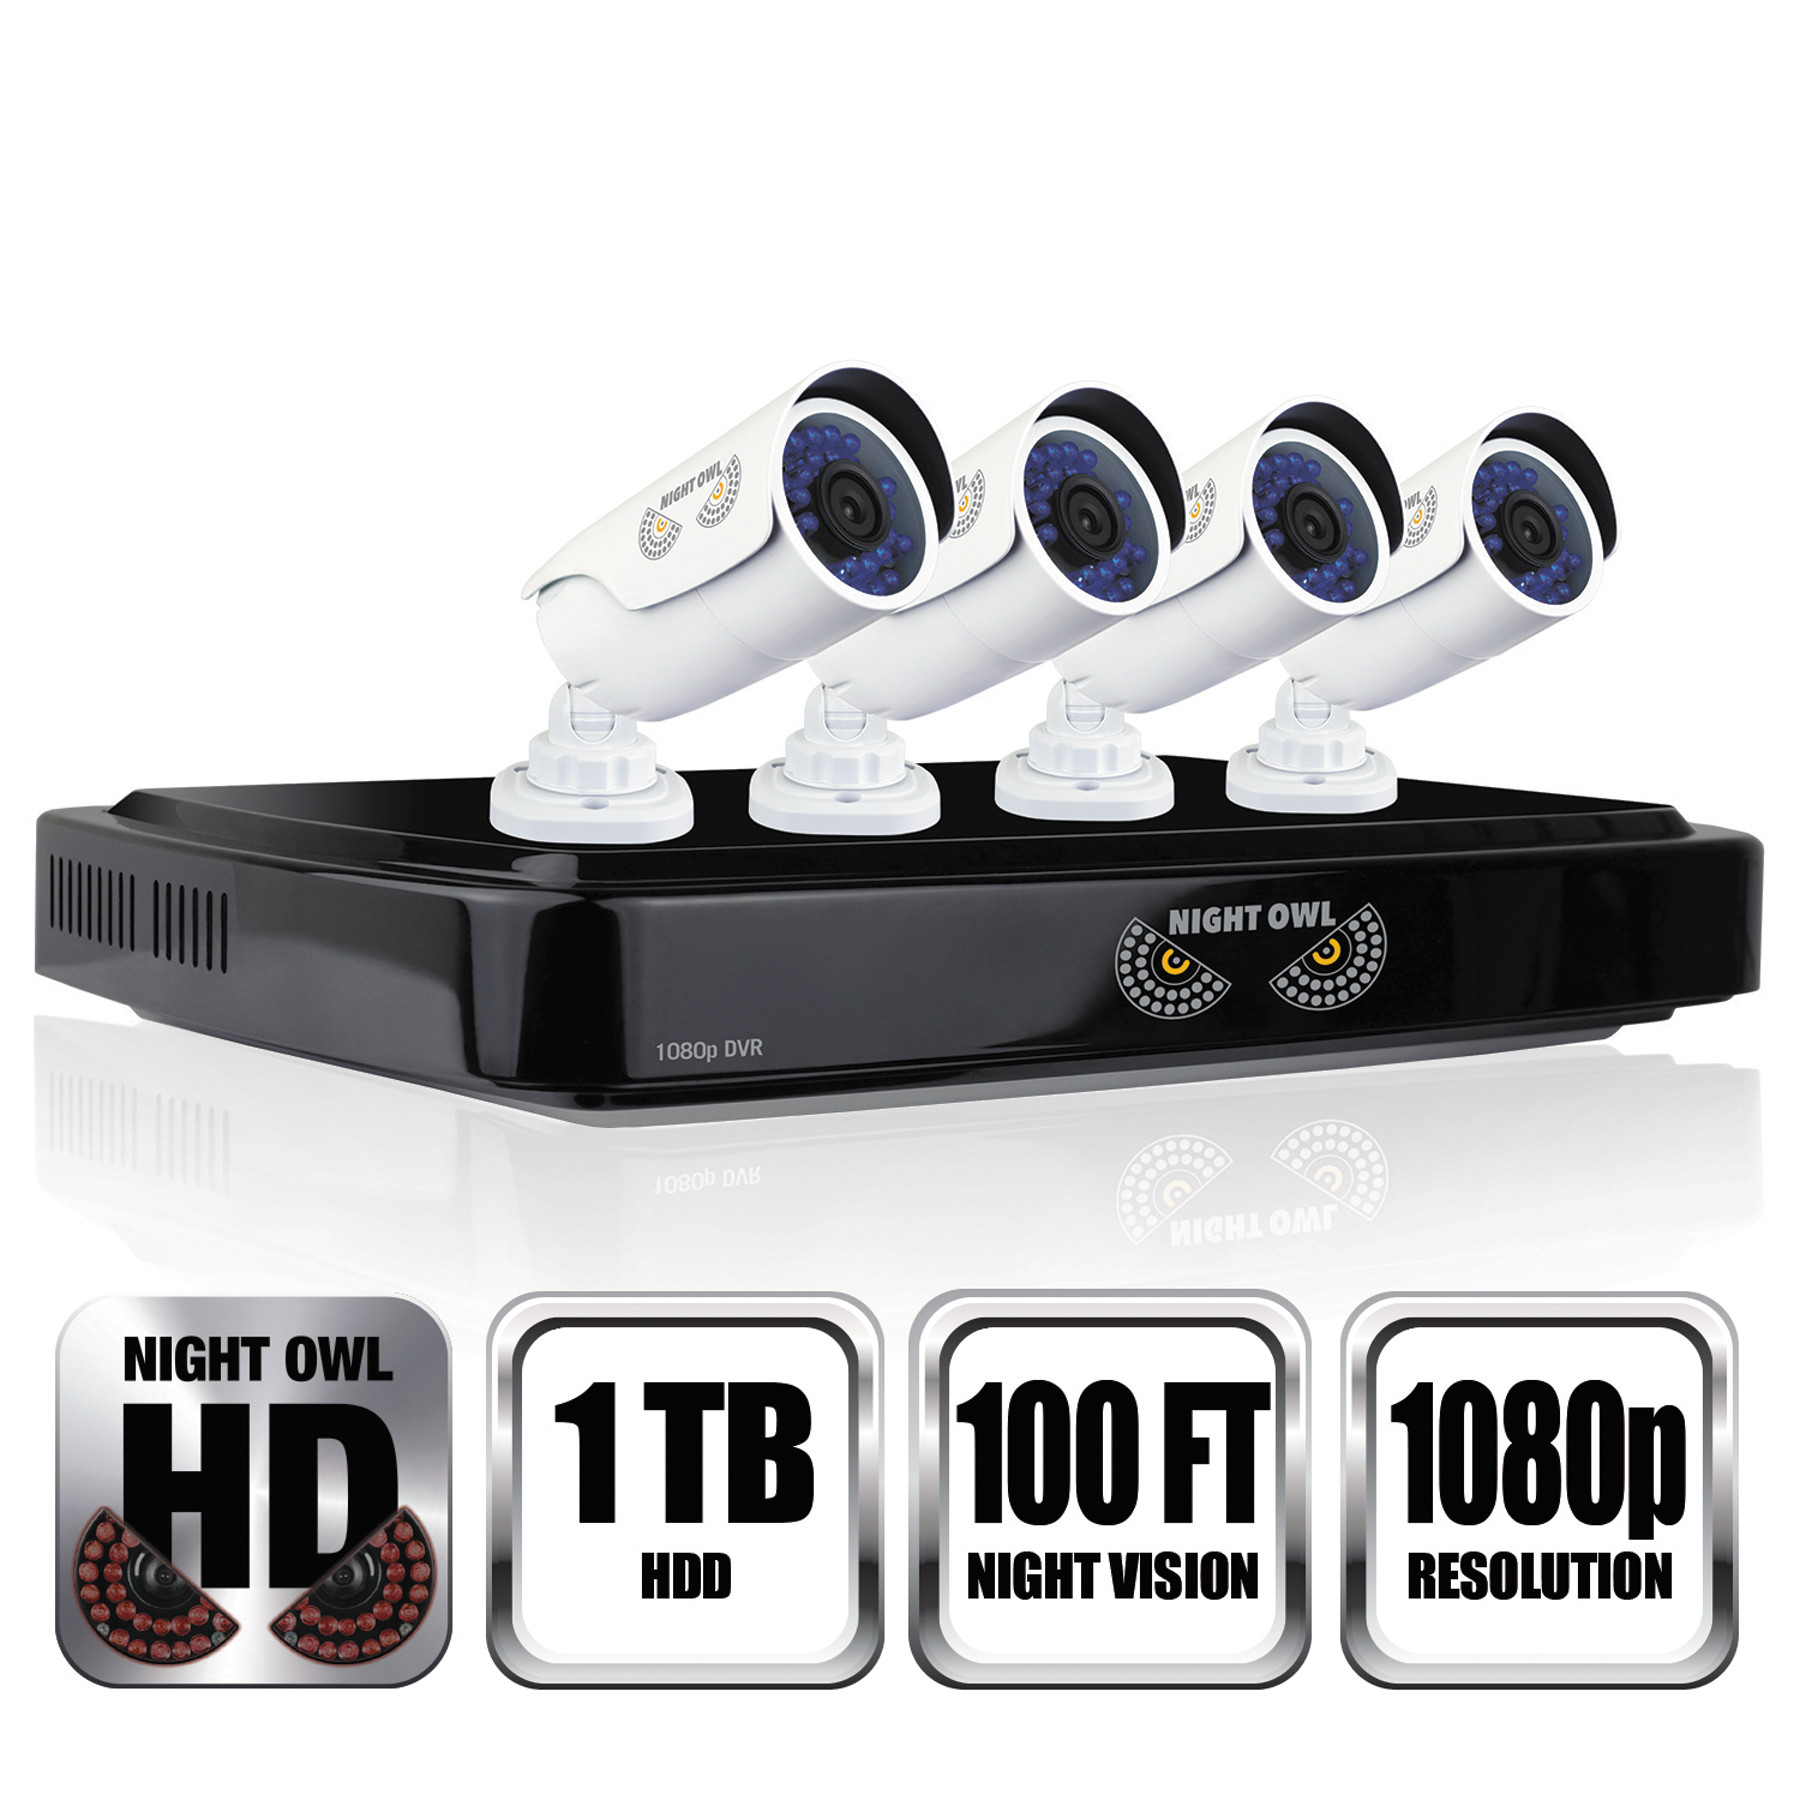 8 Channel 1080p HD Video Security DVR, 1080p Resolution